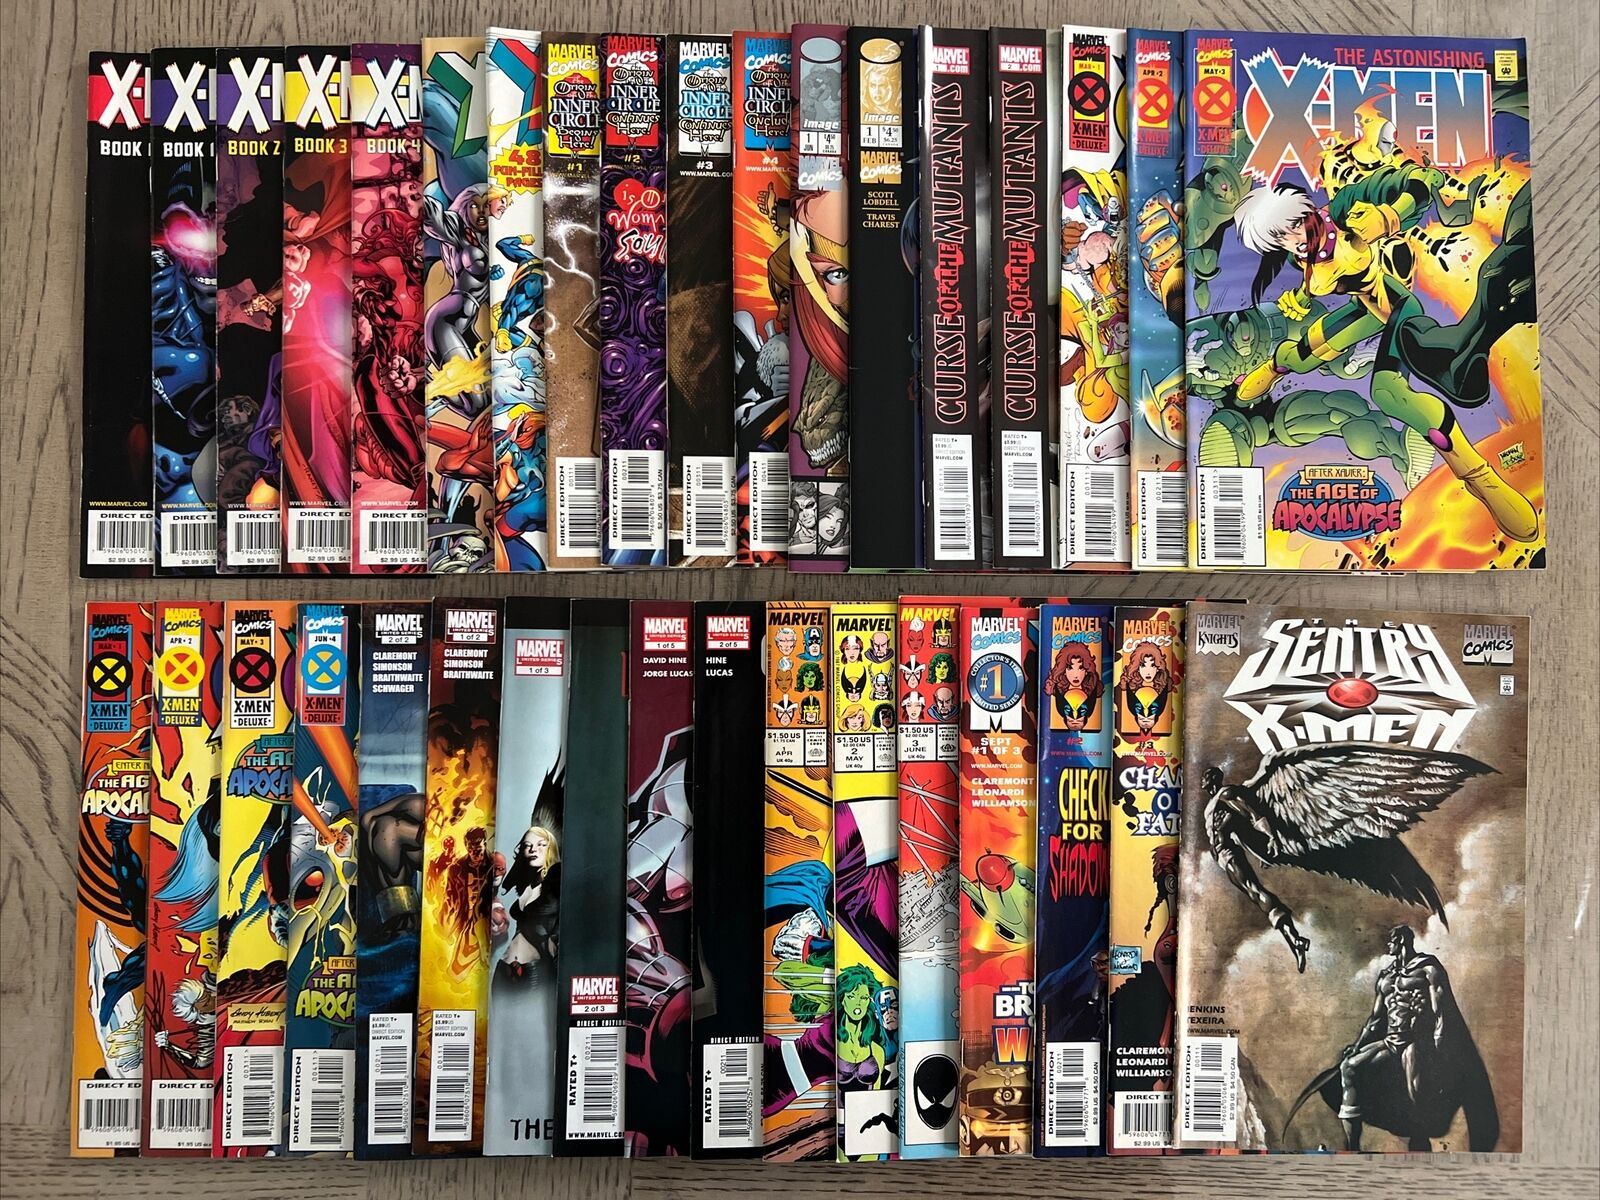 Mixed Lot Of 35 X-Men Mini Series Dark, The Amazing, The Hellfire Club And More